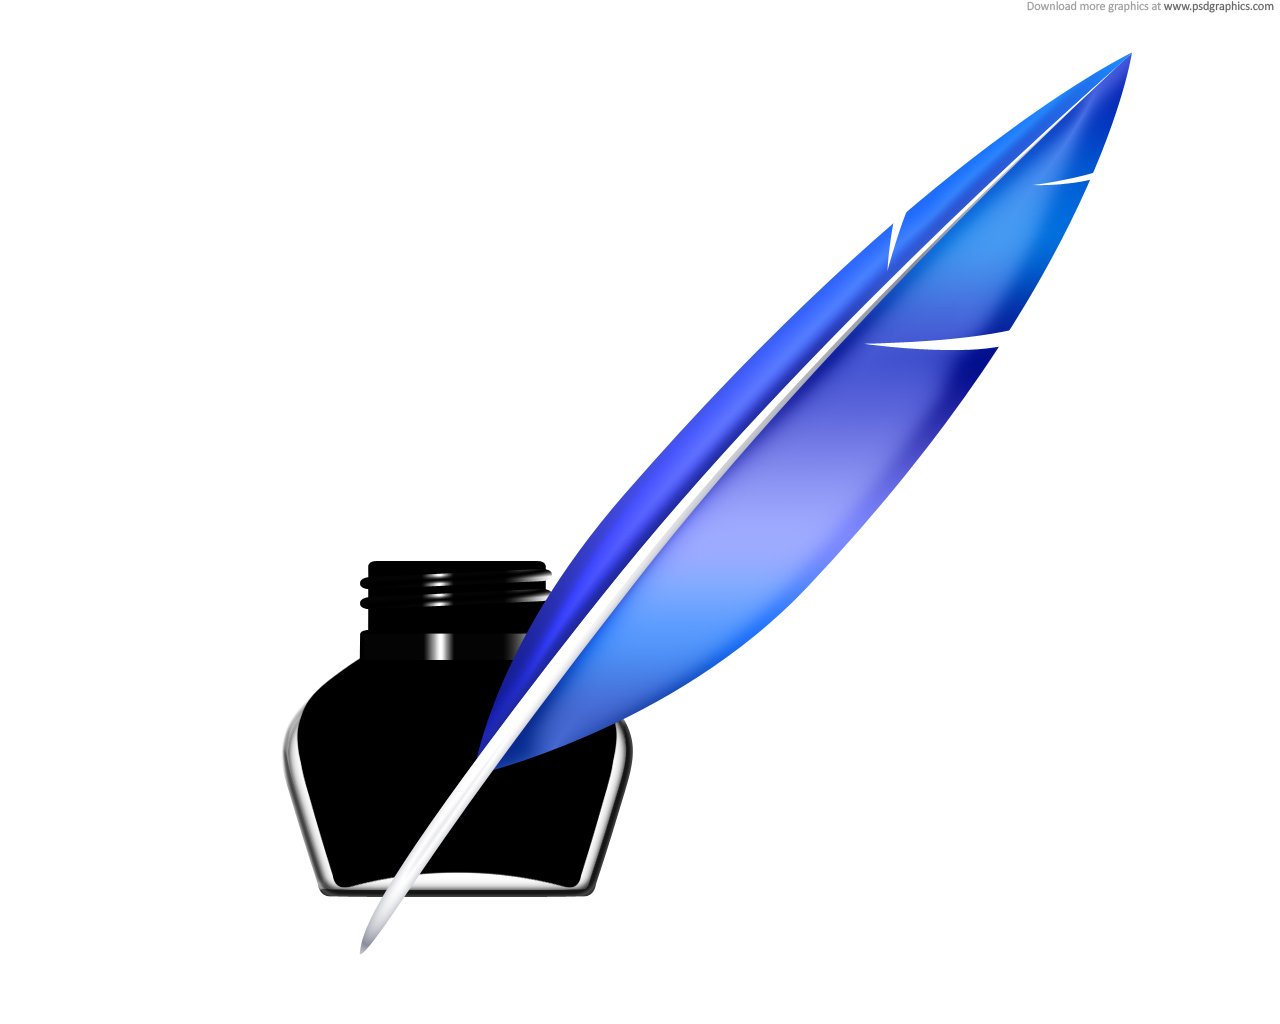 quill clipart - photo #18